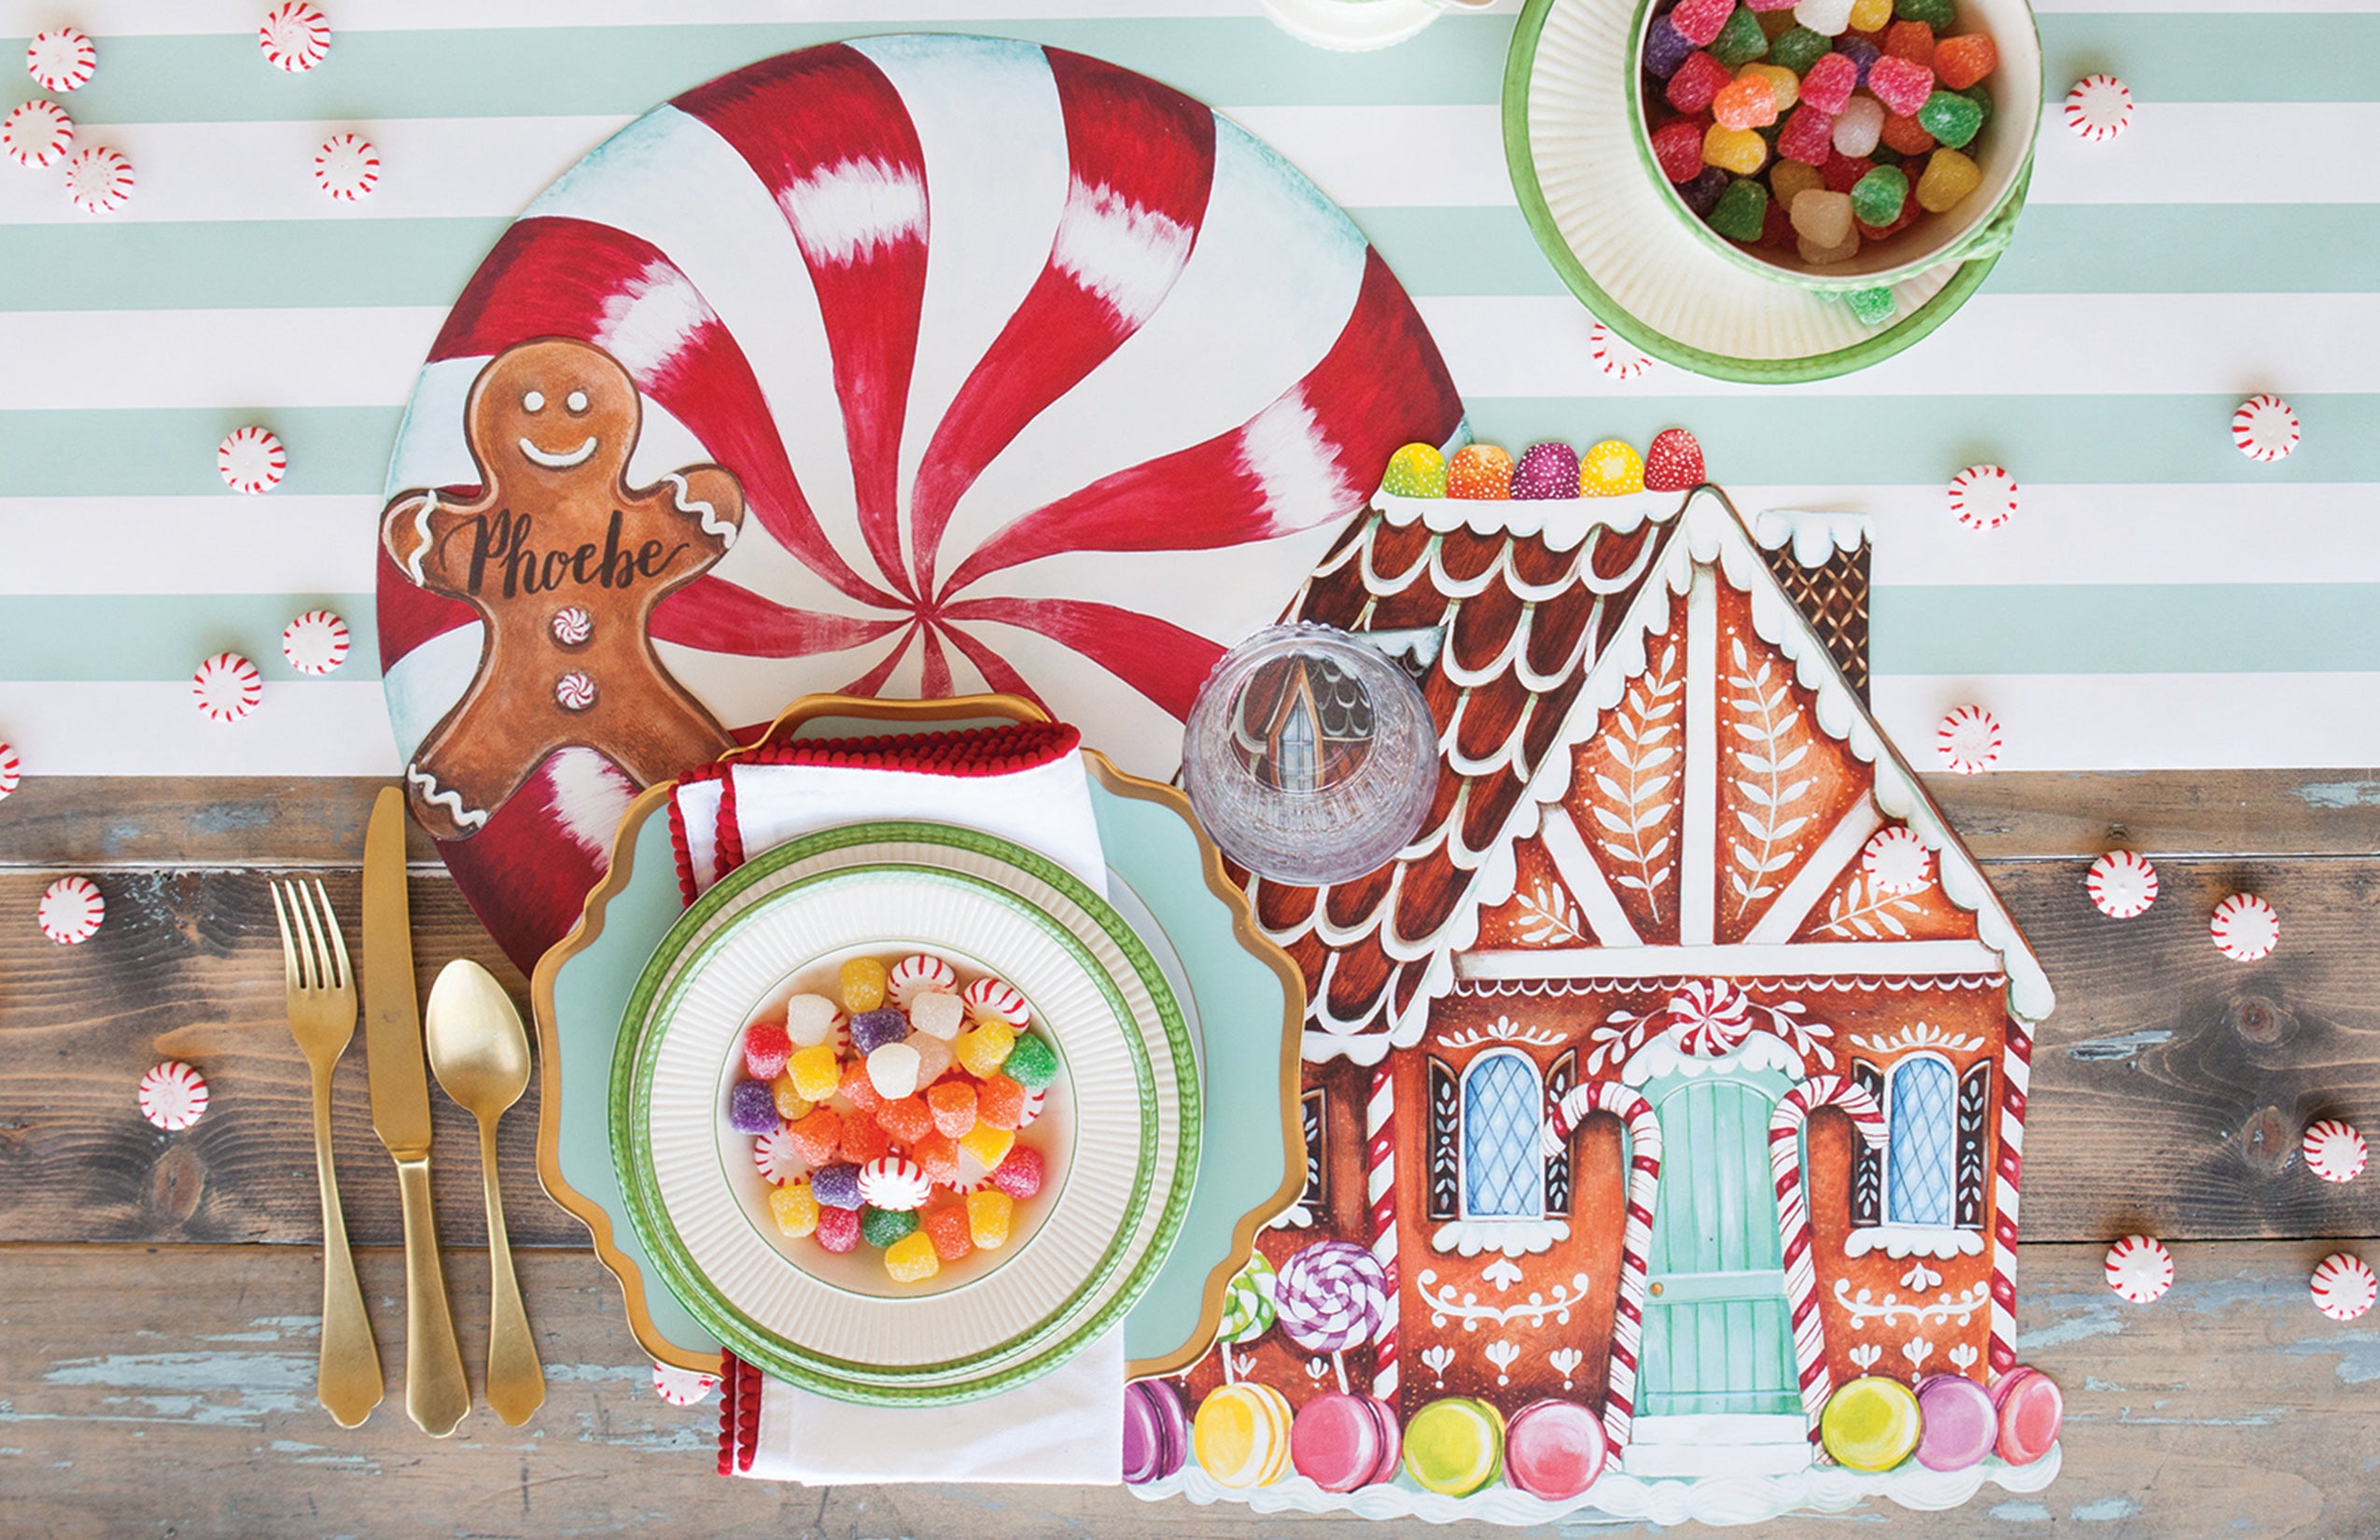 The Die-cut Peppermint Placemat under a festive Christmas candy-themed place setting, from above.